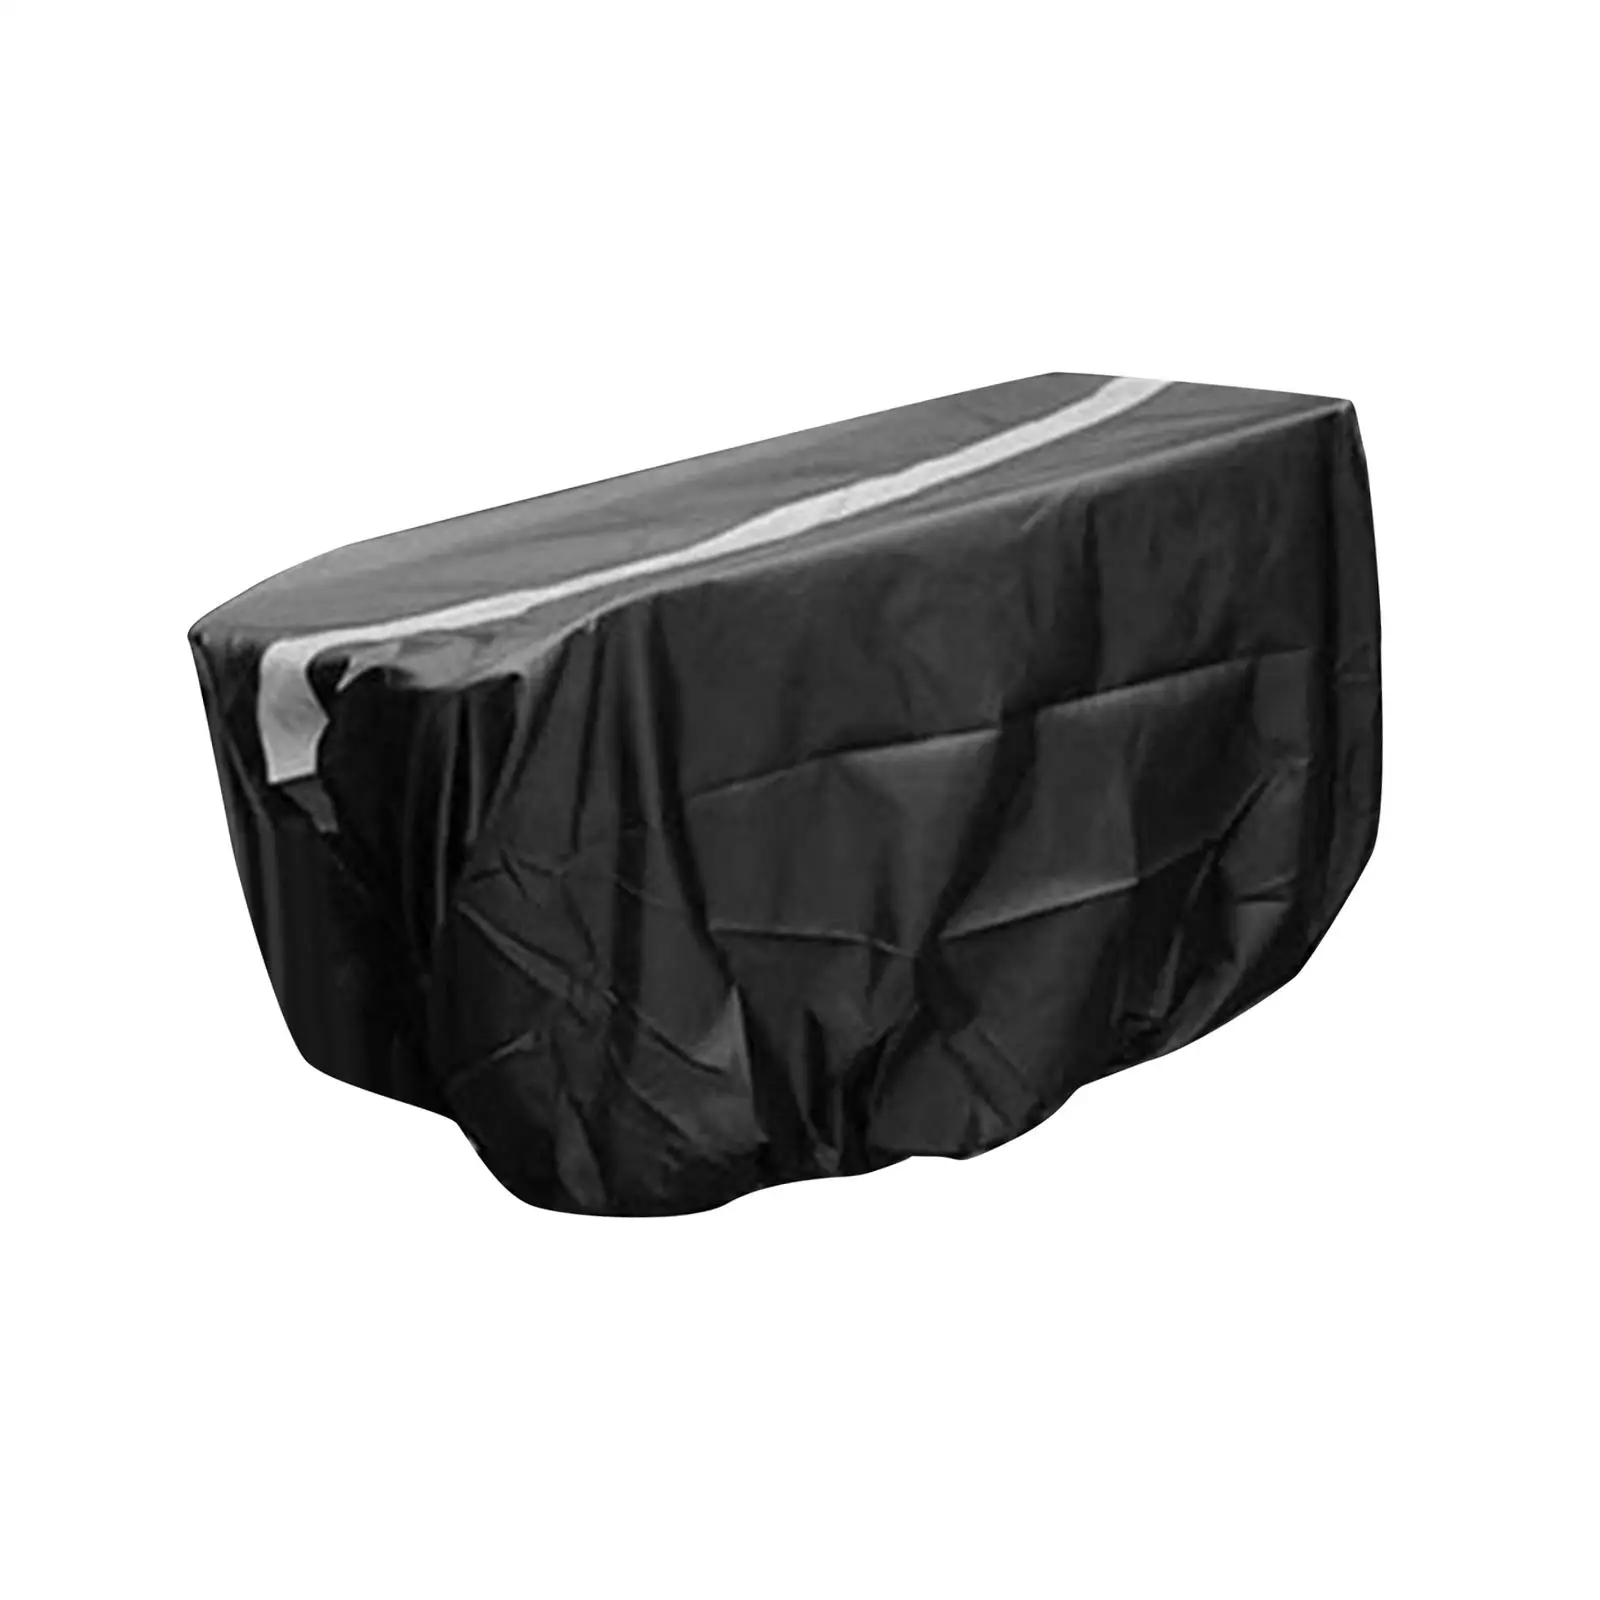 Bike Basket Cover Bike Basket Liner Black Water Resistant Bicycle Basket Rain Cover for Tricycles Electric Bikes Accessories